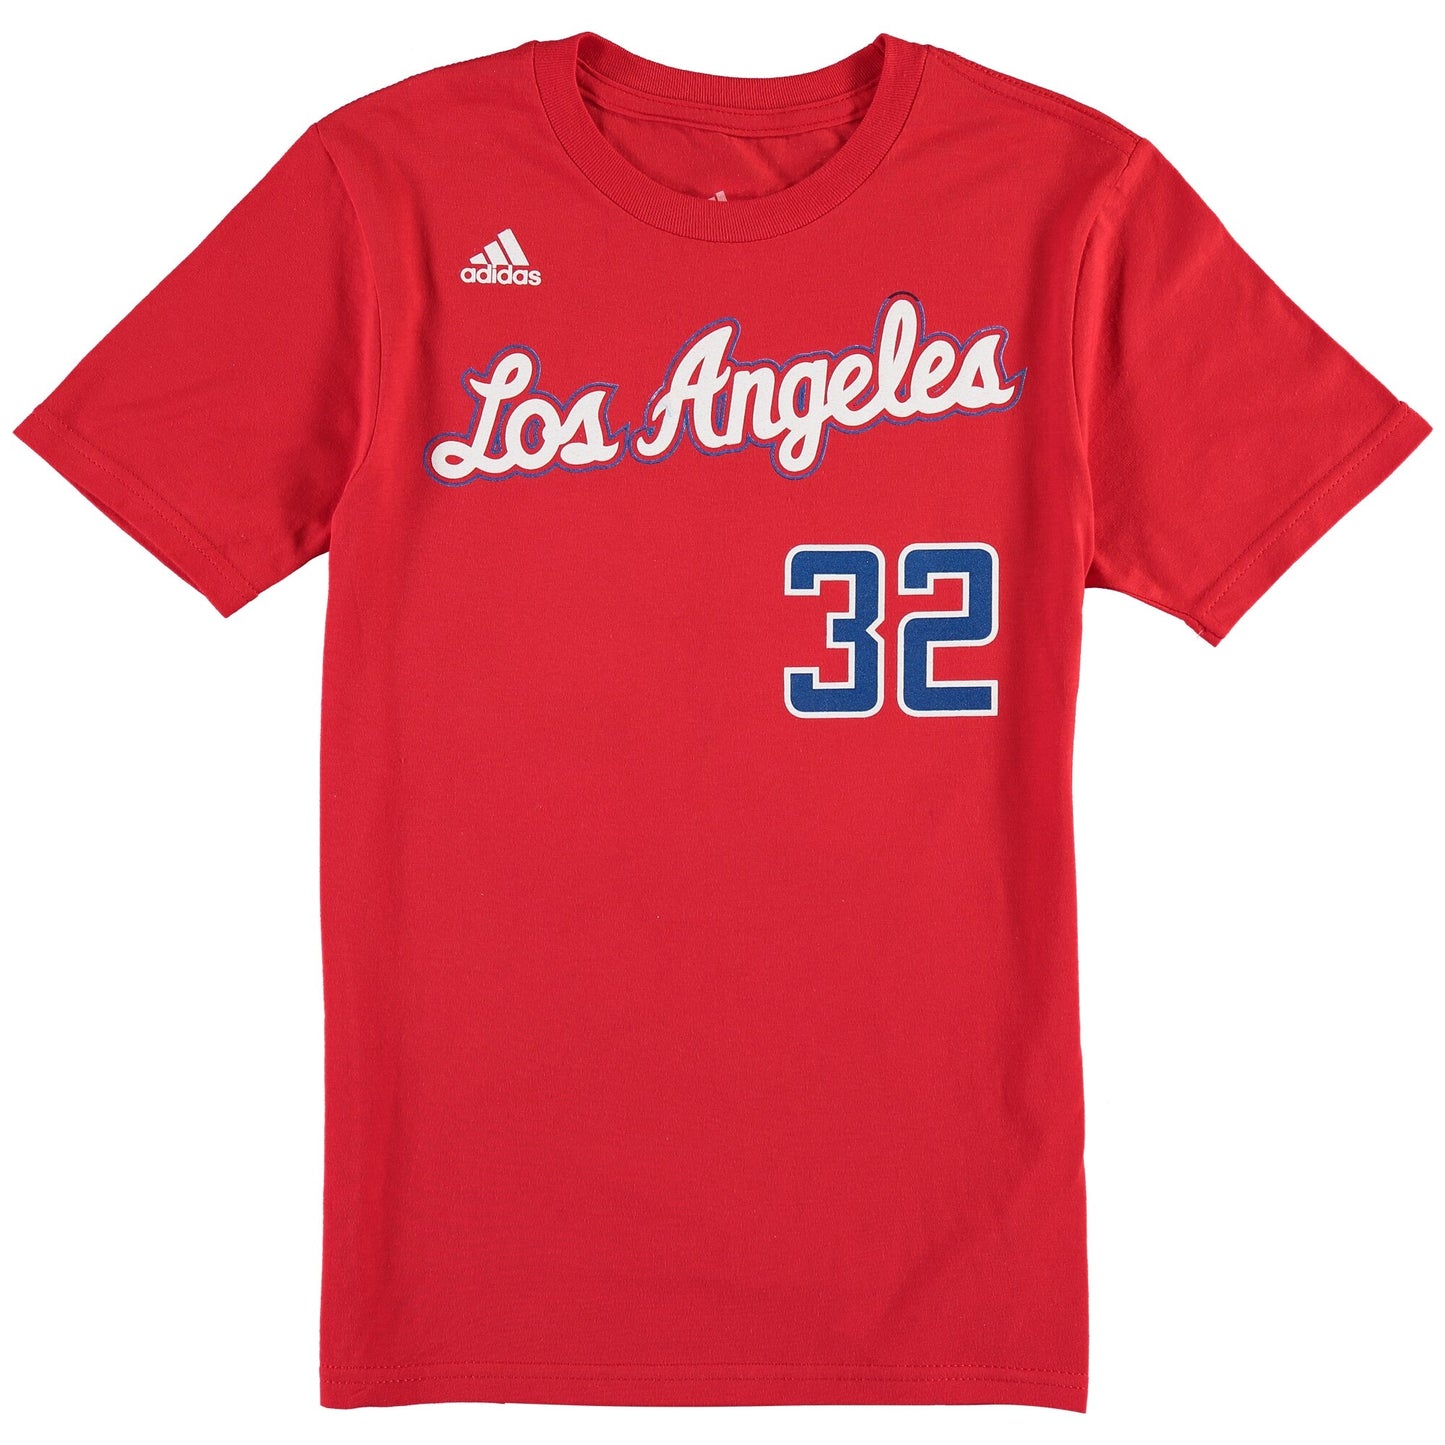 Mens Blake Griffin Los Angeles Clippers Player Tee